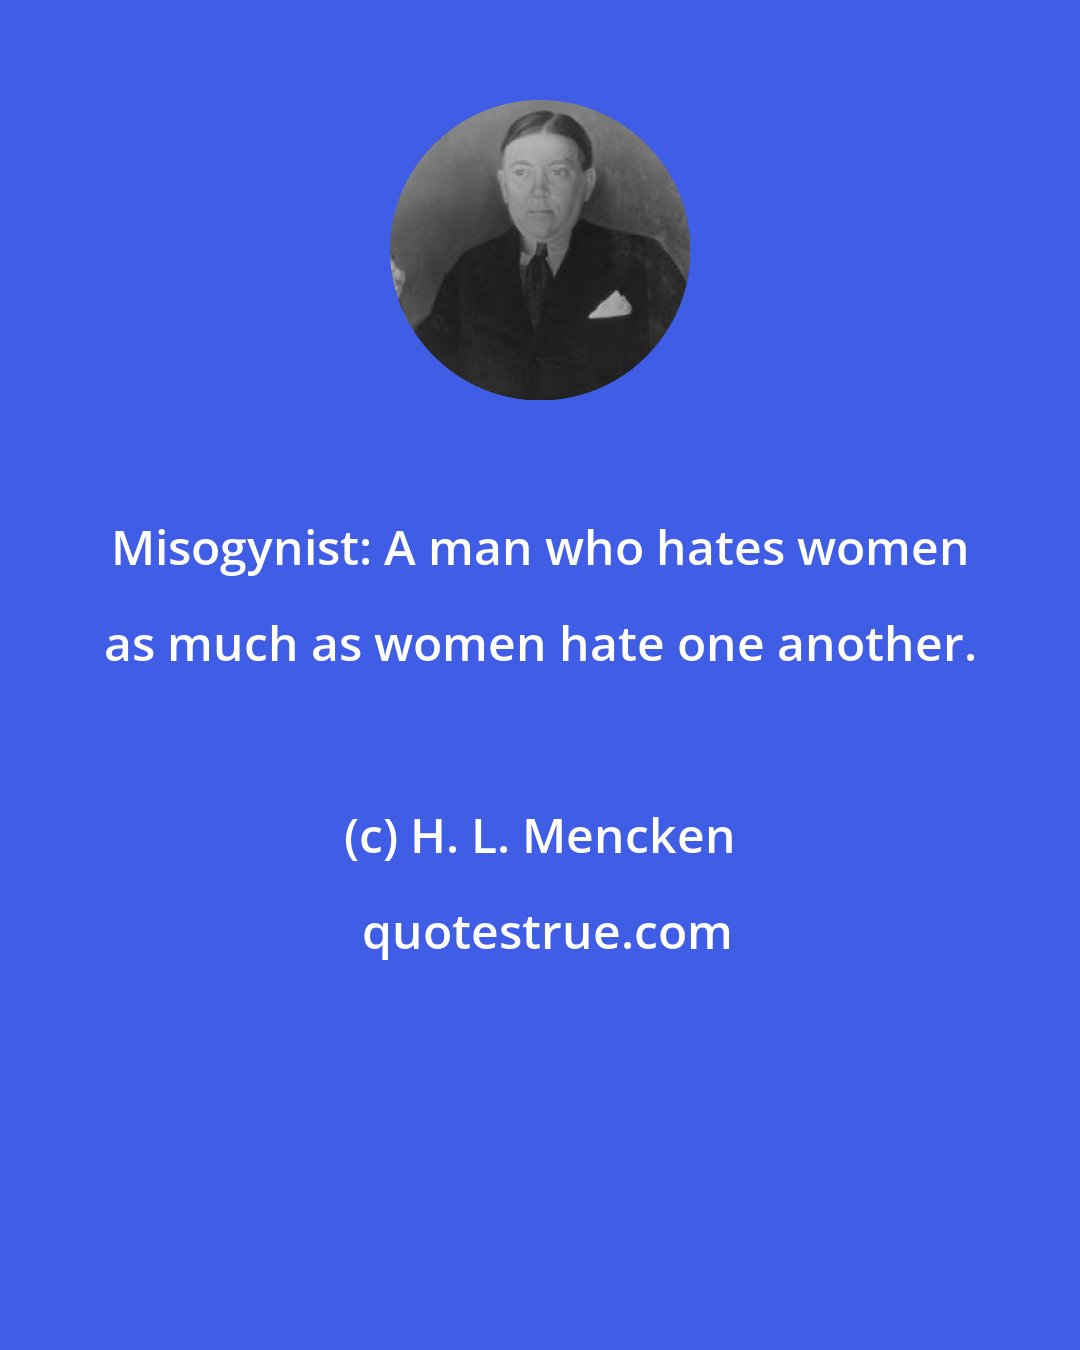 H. L. Mencken: Misogynist: A man who hates women as much as women hate one another.